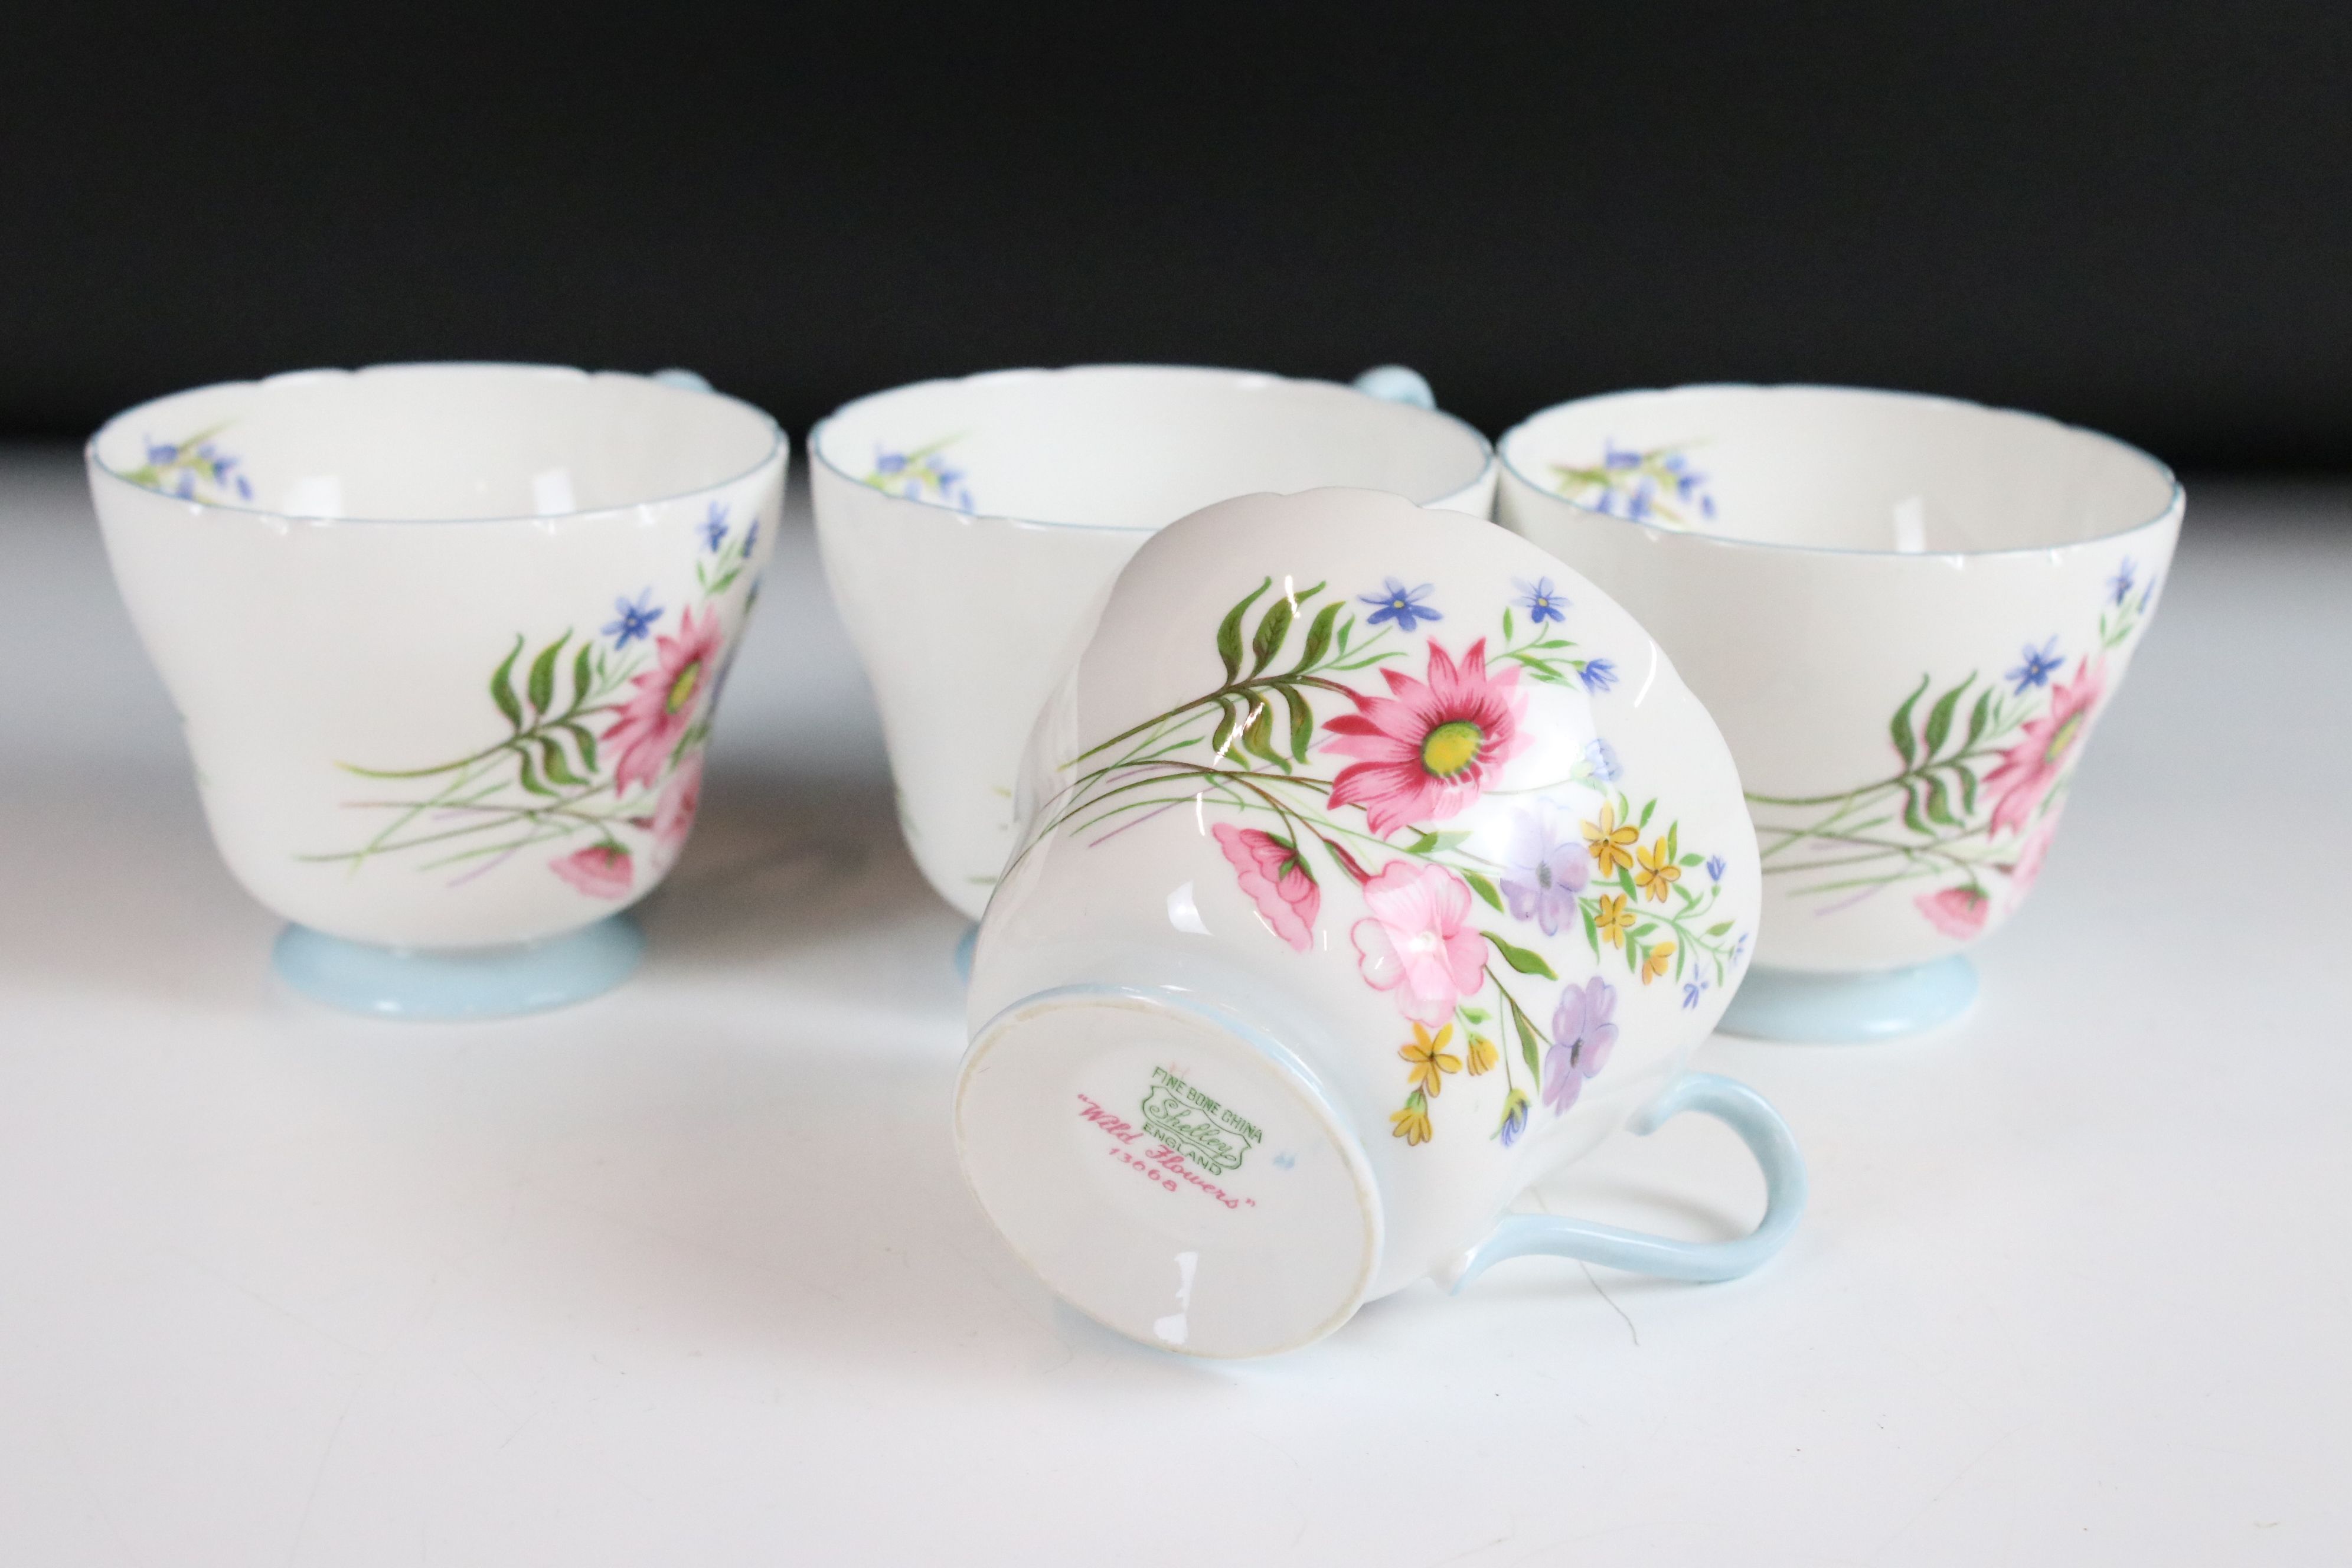 Shelley ' Wild Flowers ' Ware, pattern no. 13668, comprising Dessert Set of Six Bowls and a - Image 9 of 11